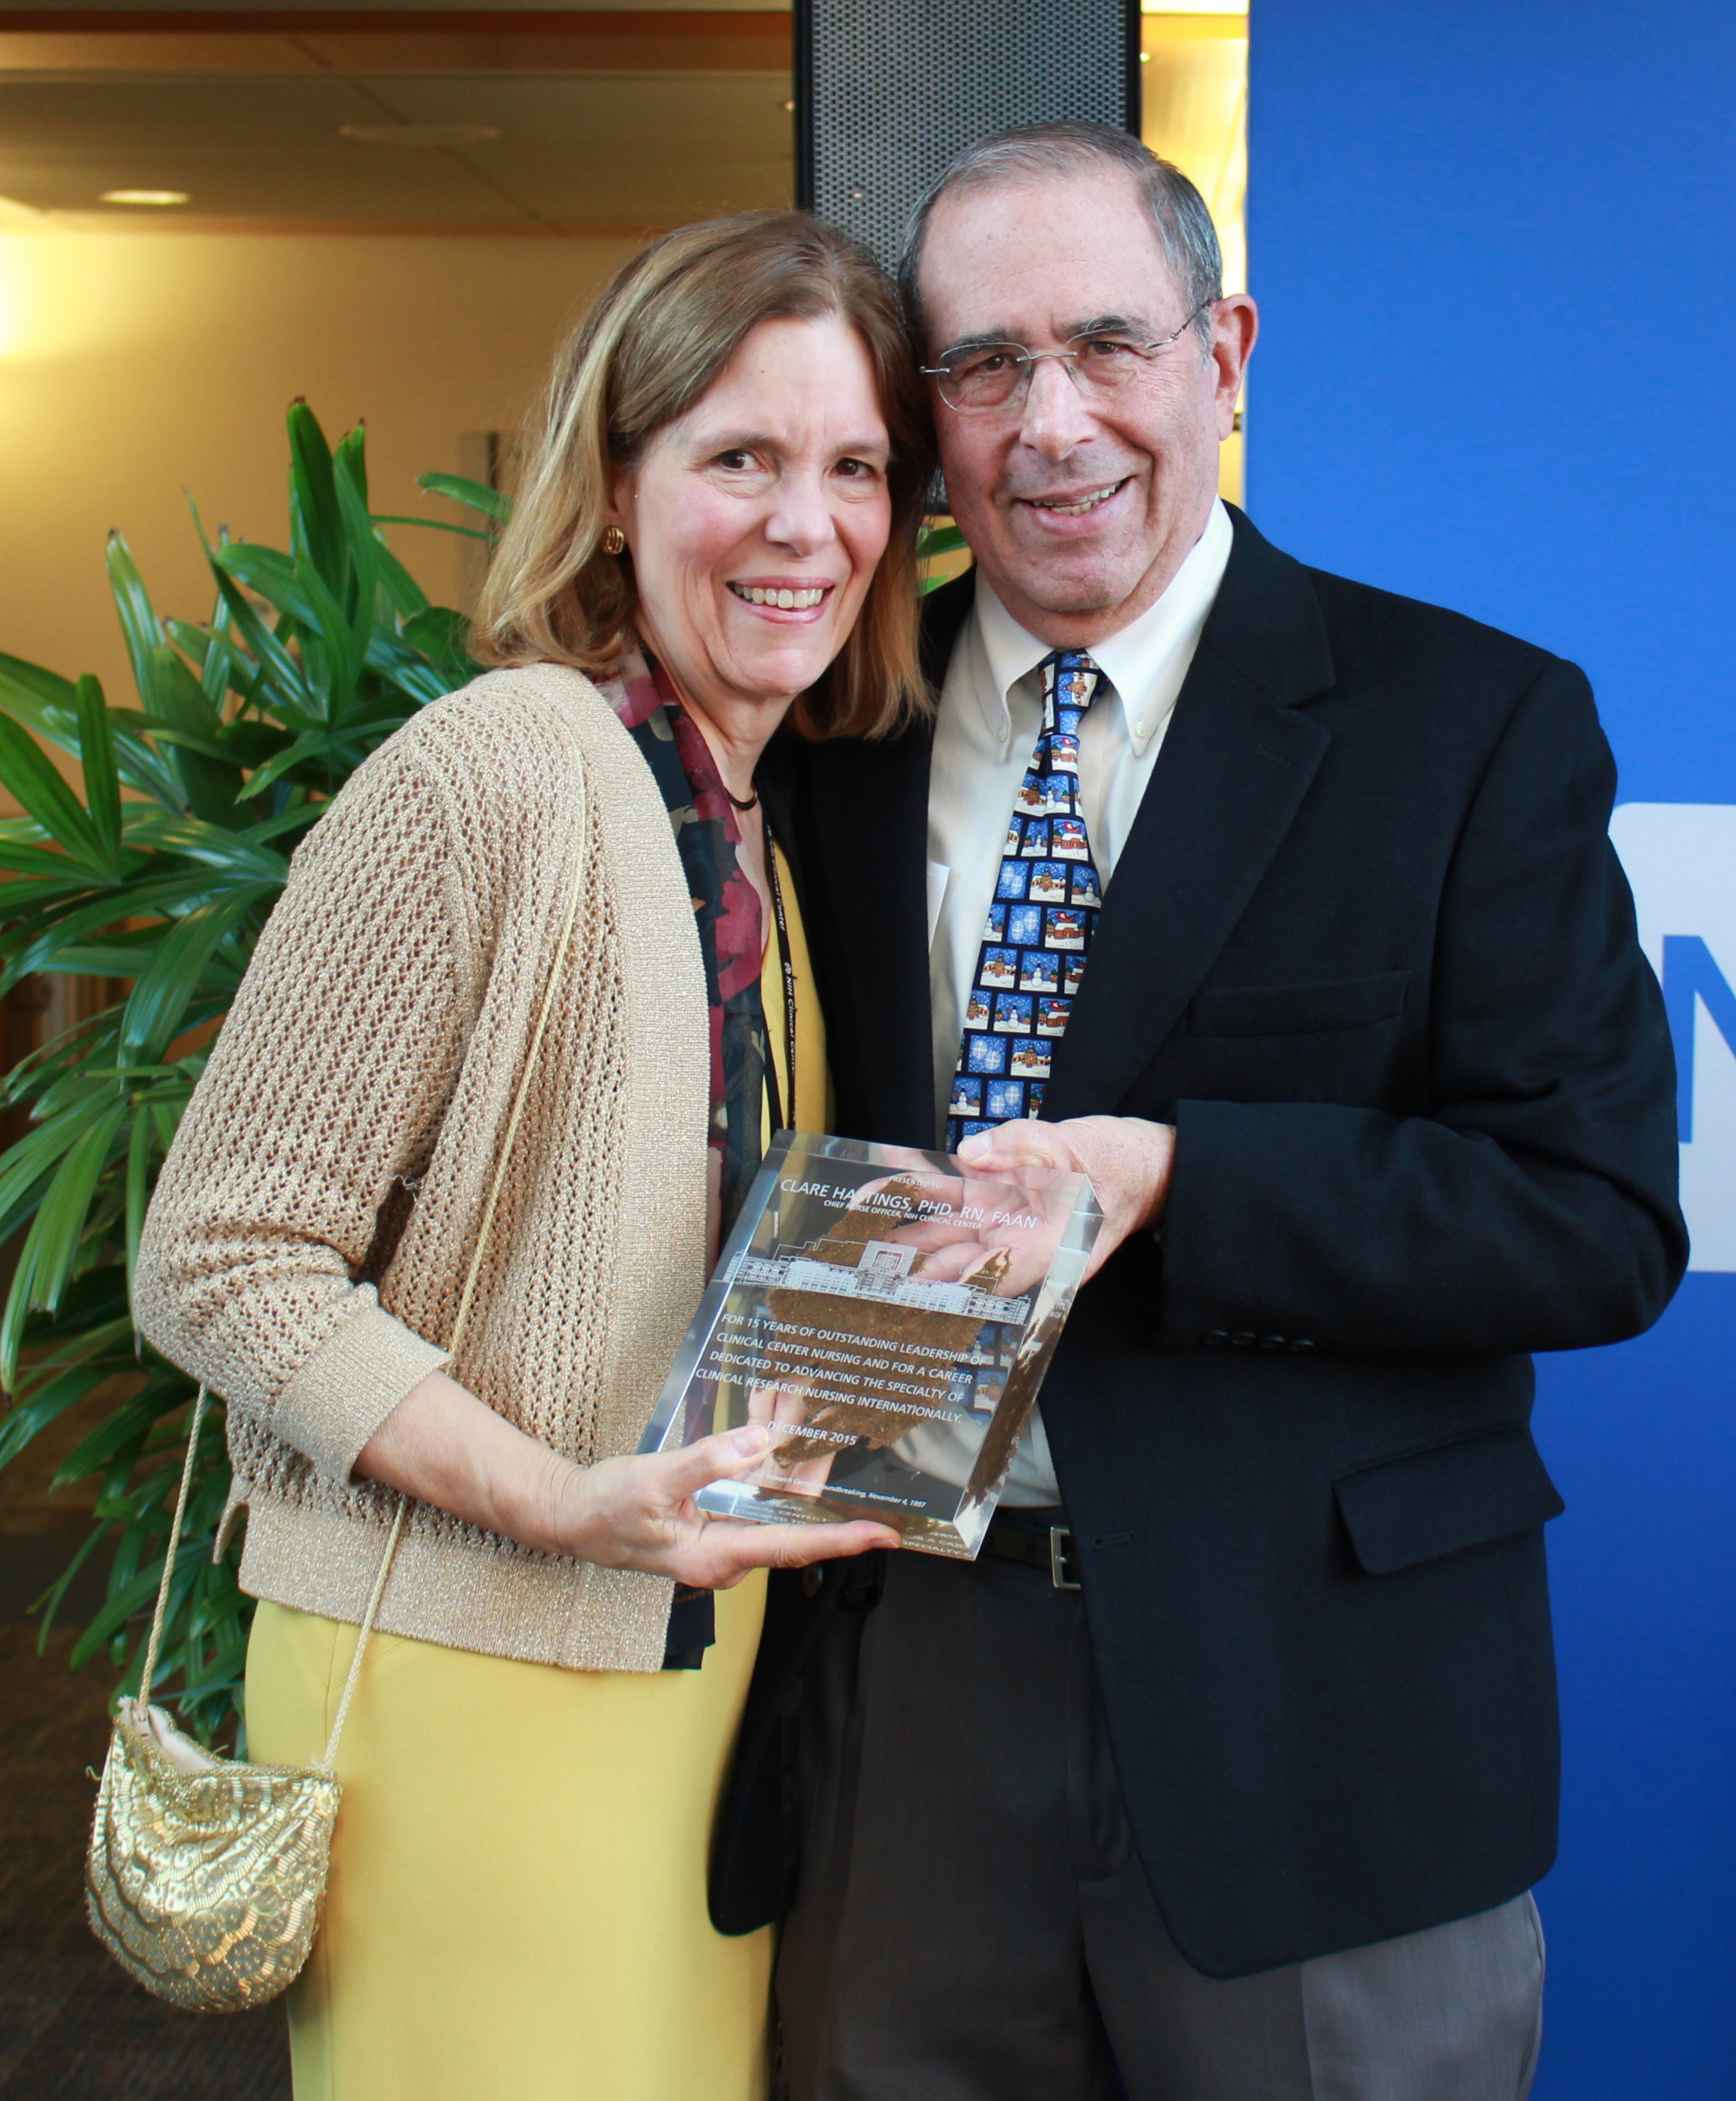 Dr. John I. Gallin presents Dr. Clare Hastings with the 'dirt award' at her retirement gathering.